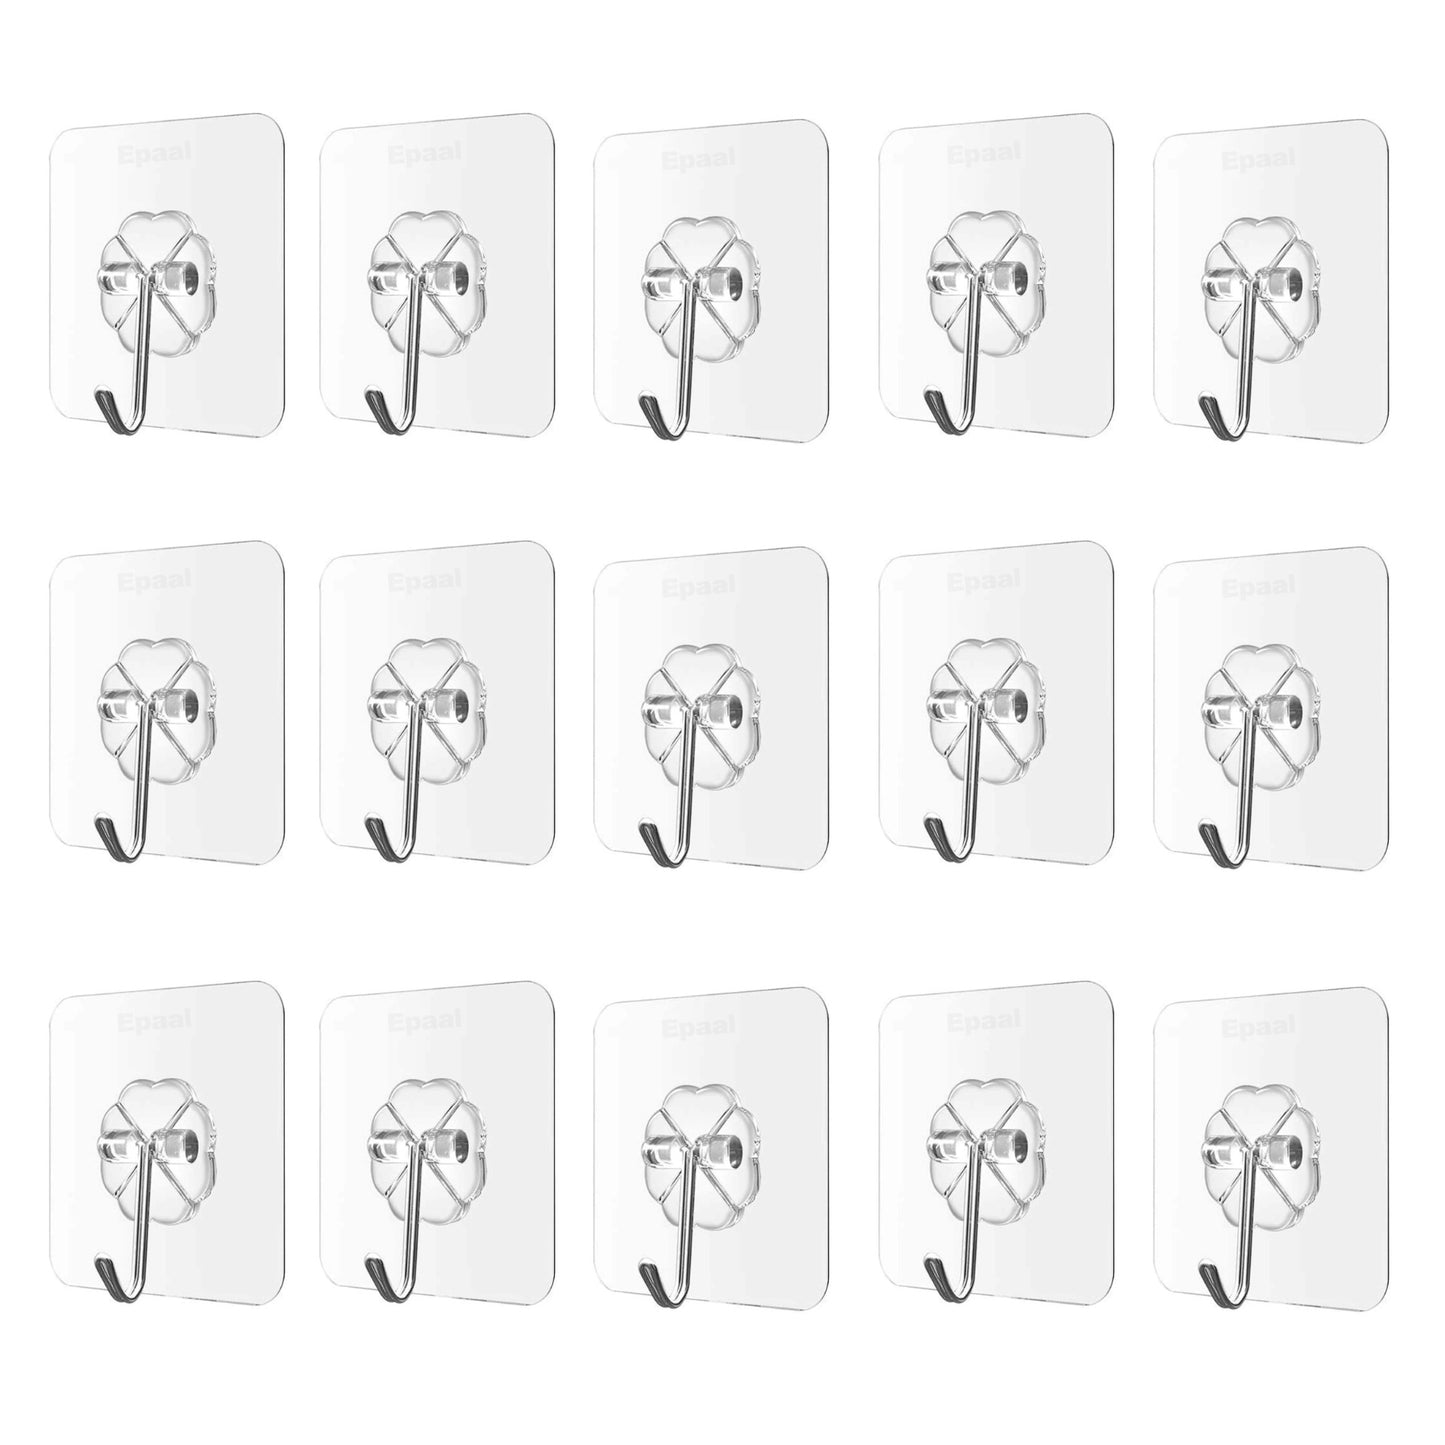 Epaal Hooks for Wall / Bathroom NO Drilling, Waterproof Stick on Adhesive Stronger Plastic Wall Hooks Hangers for Hanging Robe, Coat, Towel, Keys, Bags, Lights, Calendars